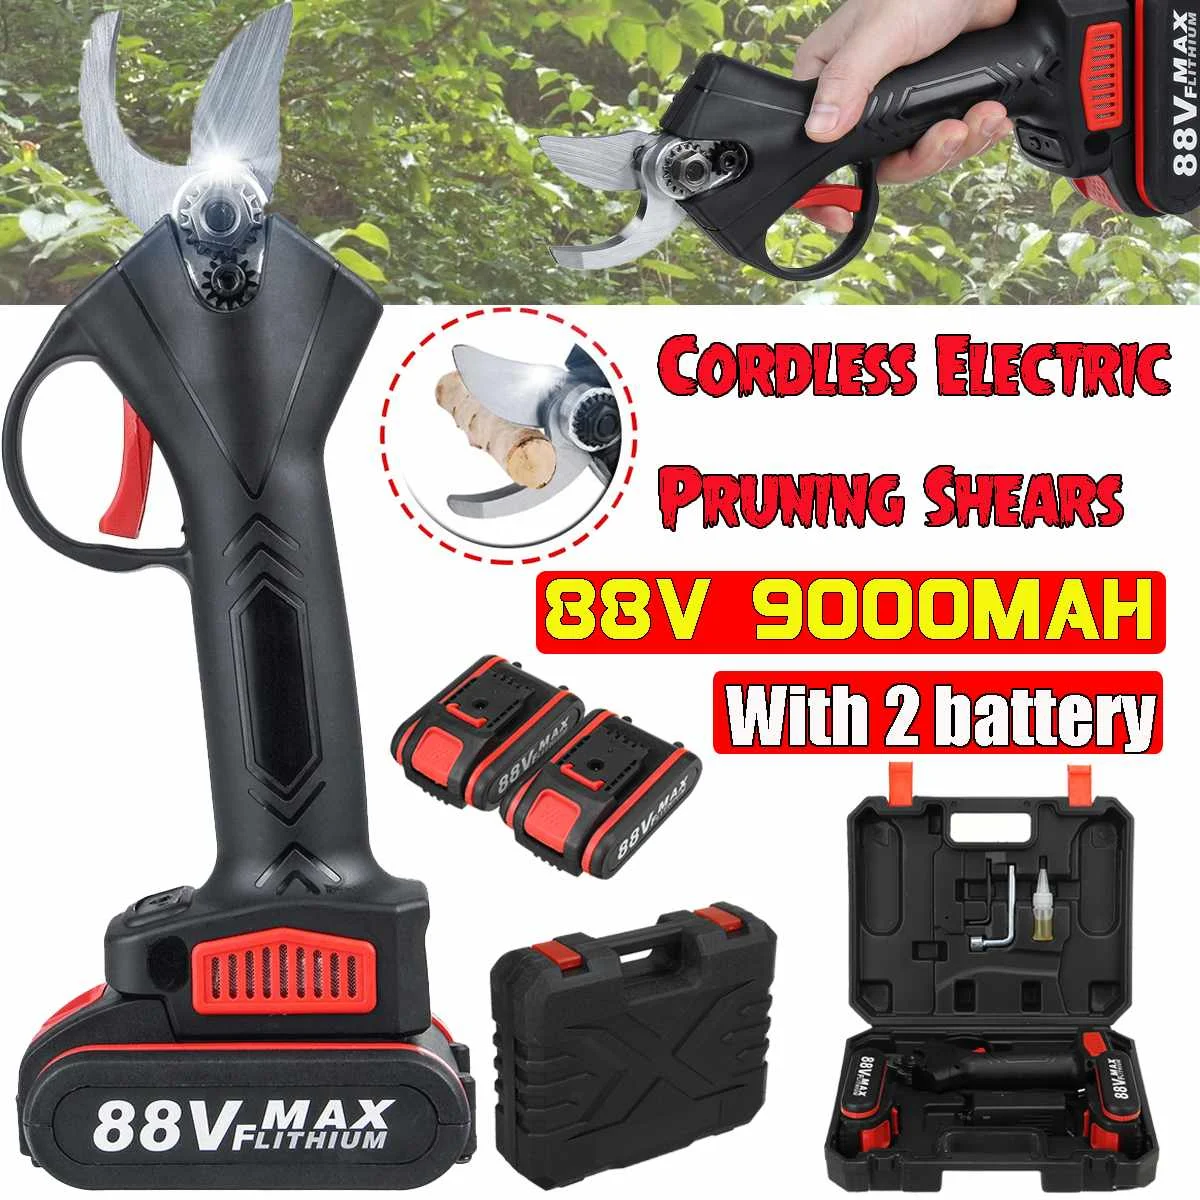 

88V Cordless Electric Pruning Shears Pruner Secateur 30mm Max Cutting with 2pc 9000mAh Lithium-ion Battery Garden Branch Cutter